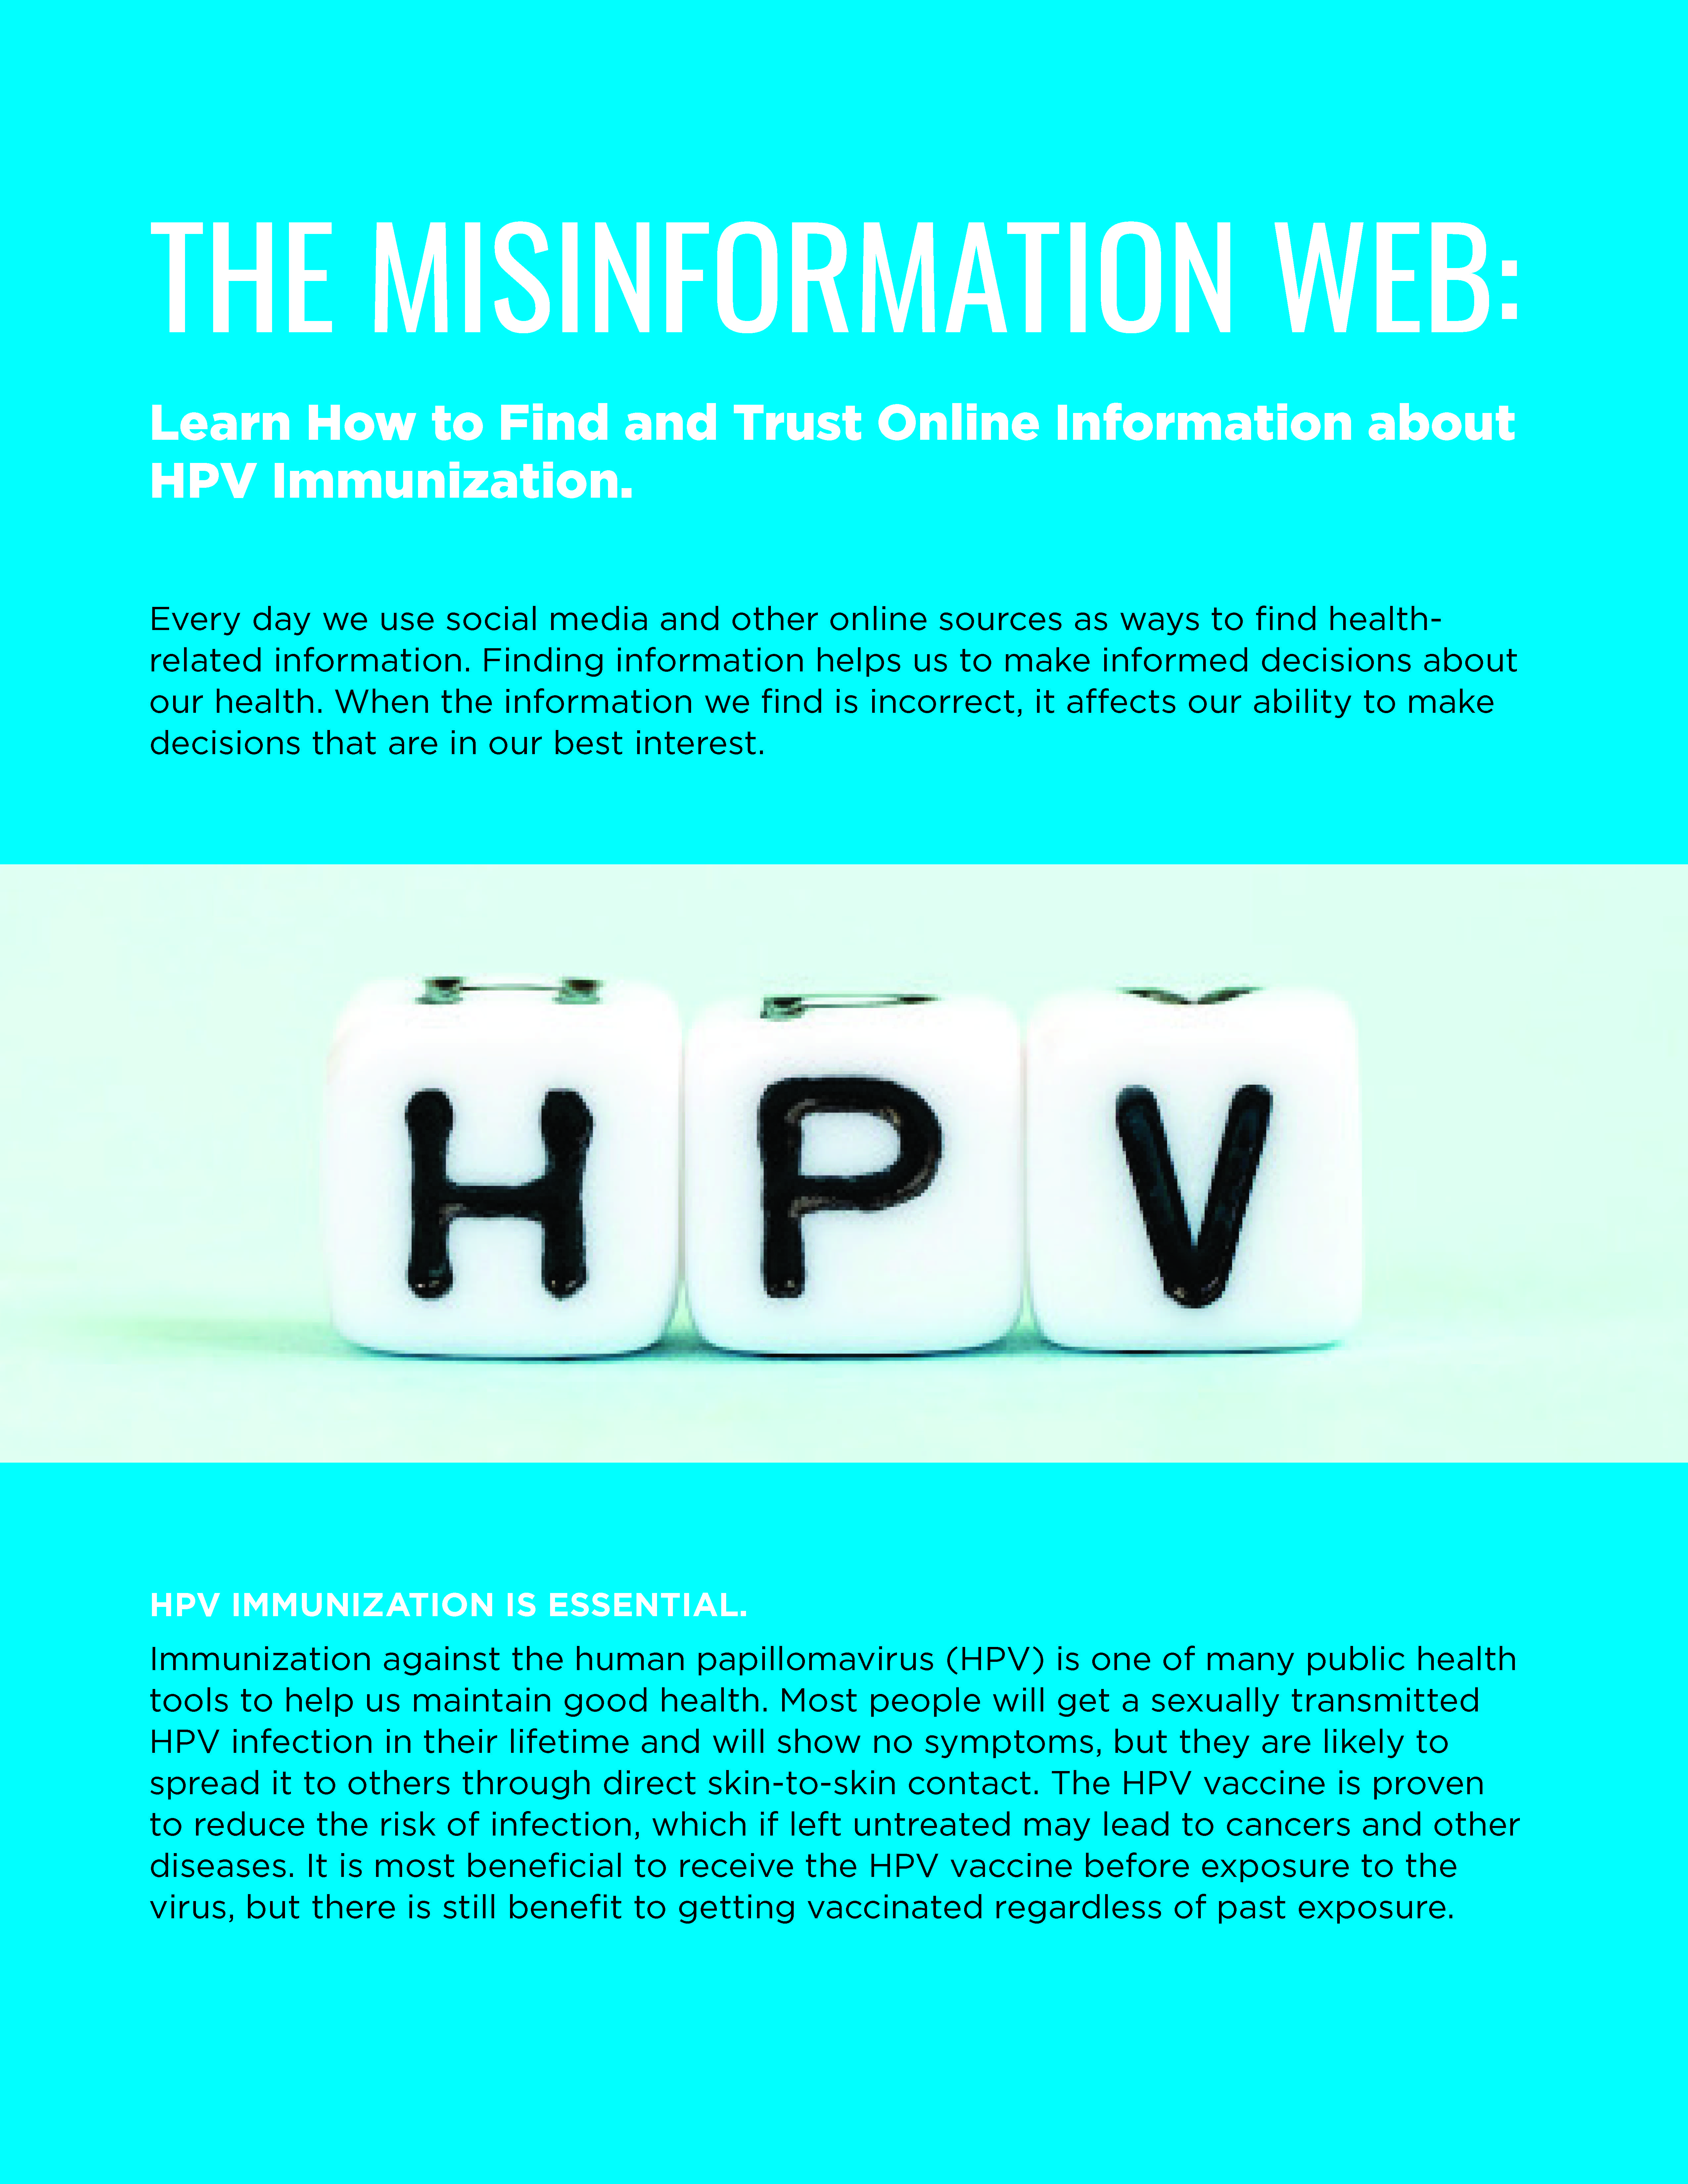 Ths Misinformation Web: Learn how to find and trust online information about HPV immunization - factsheet